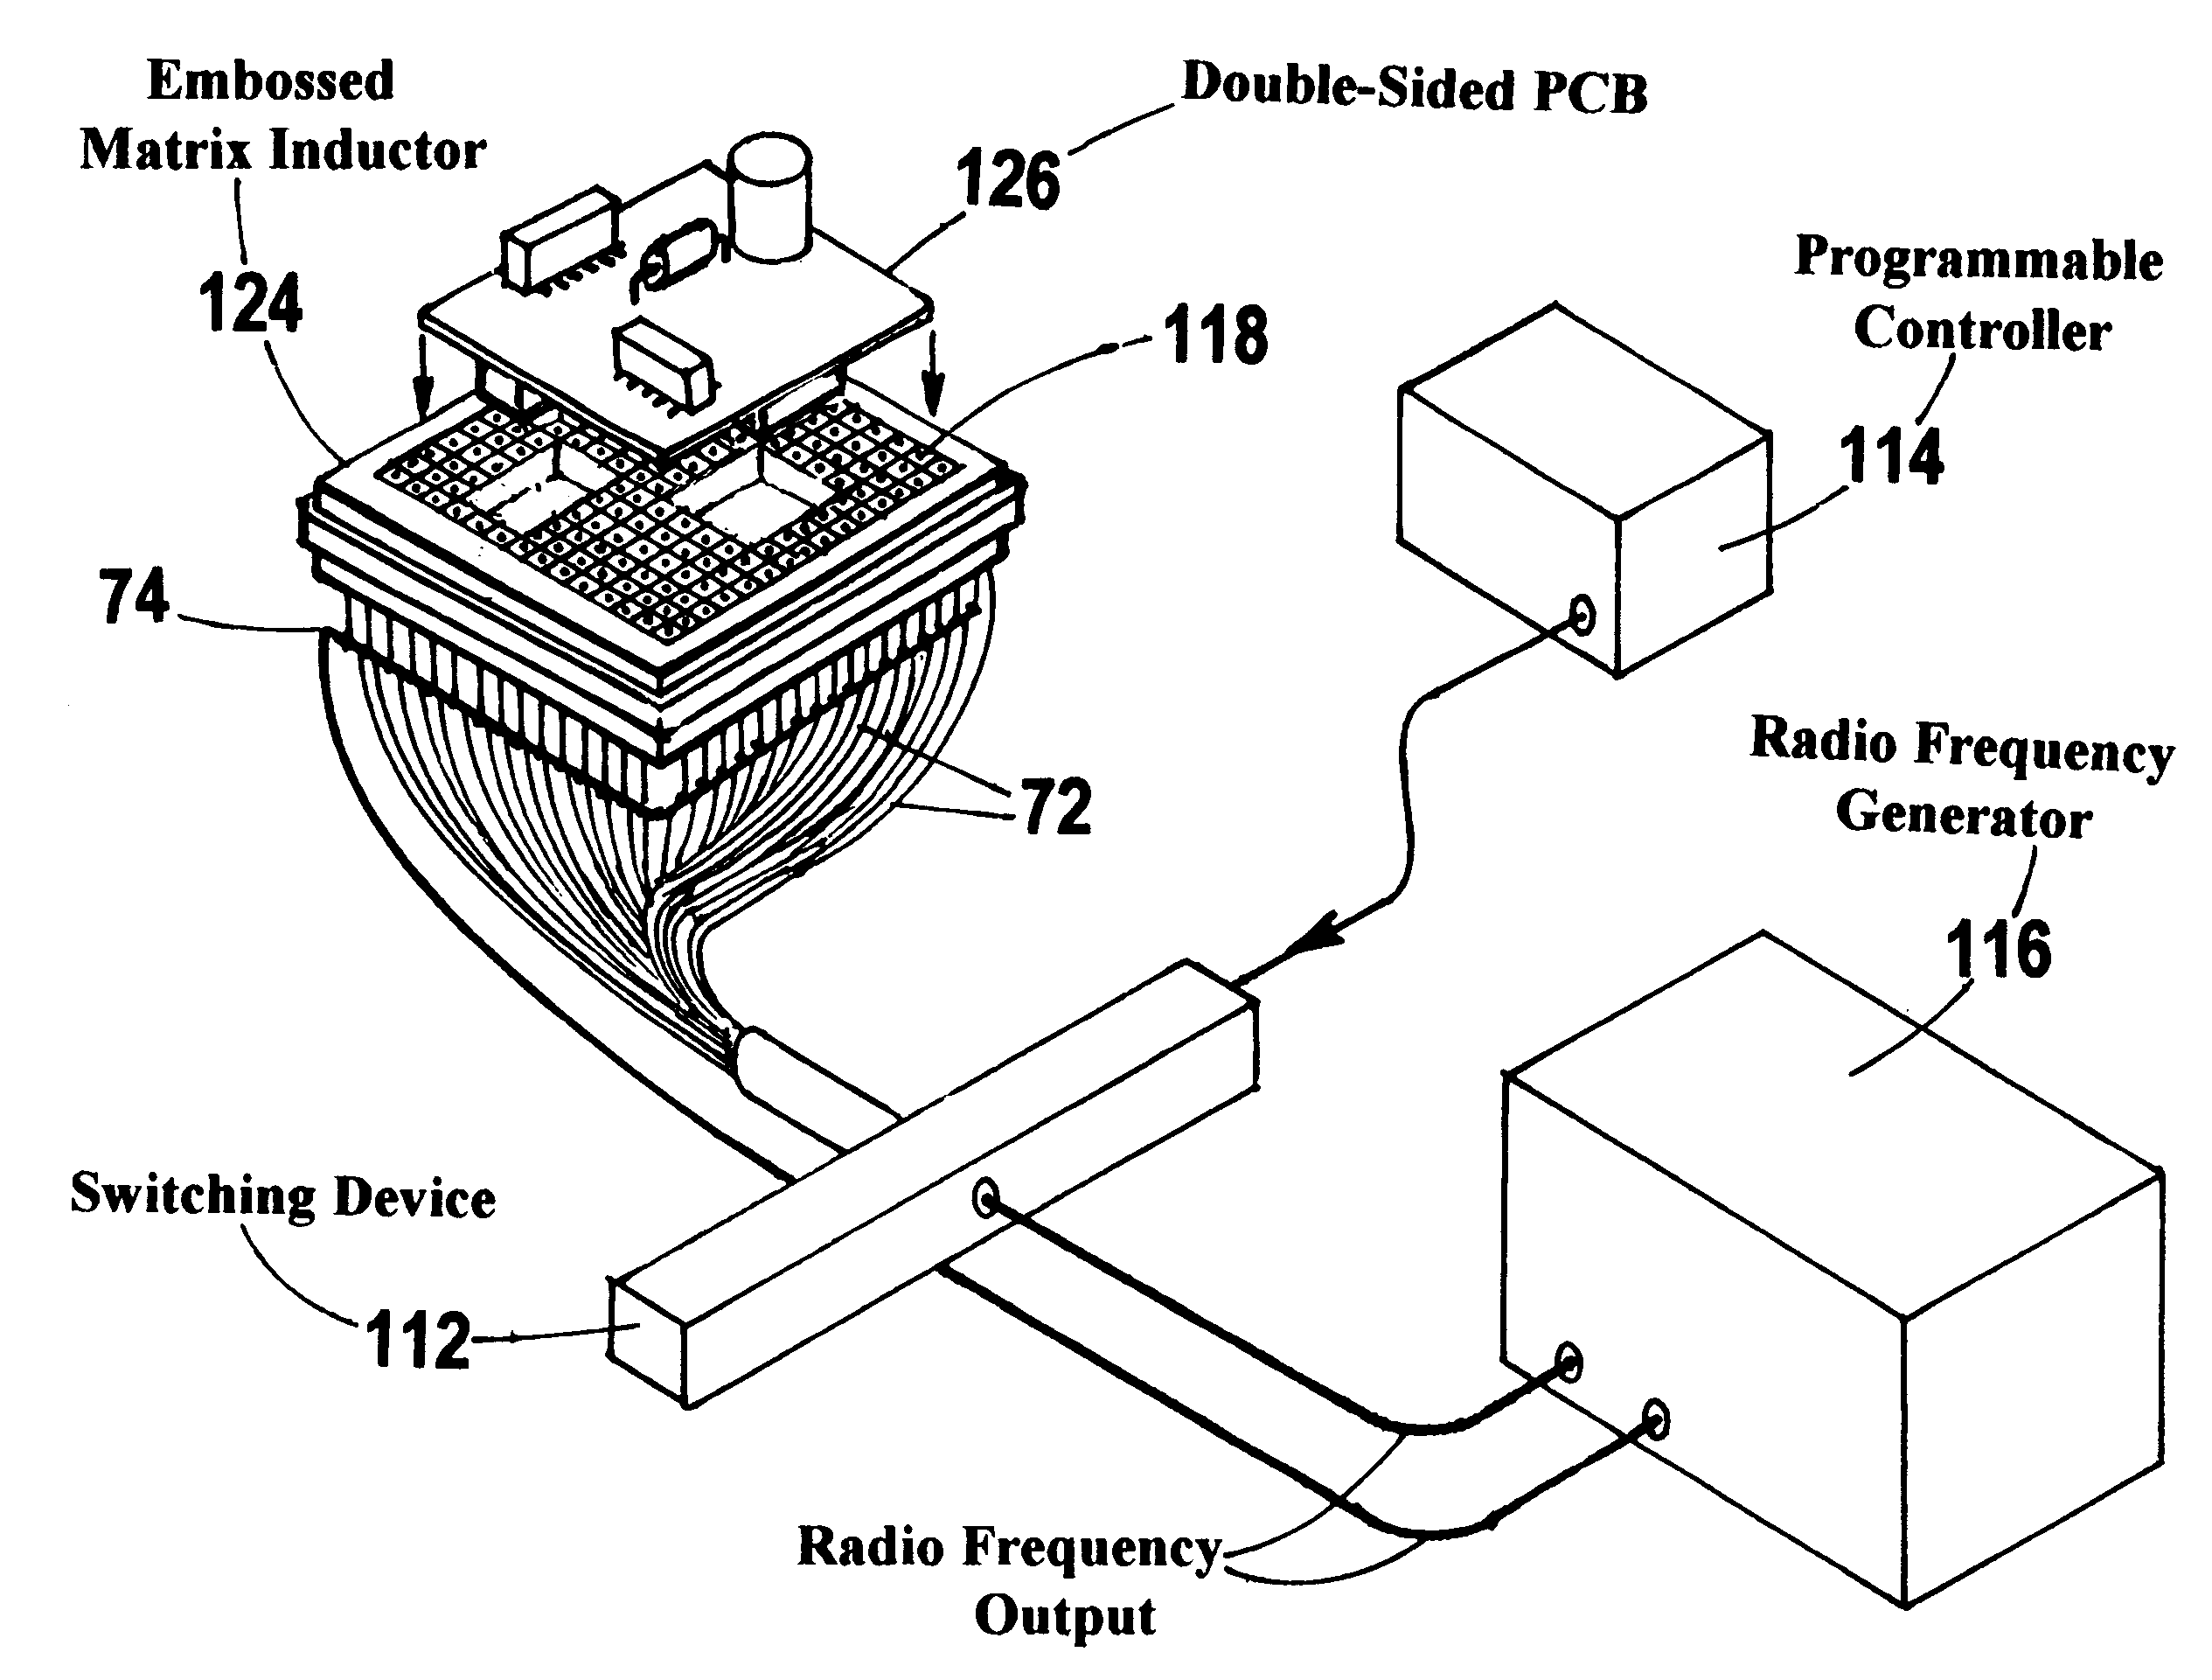 Matrix-inductor soldering apparatus and device